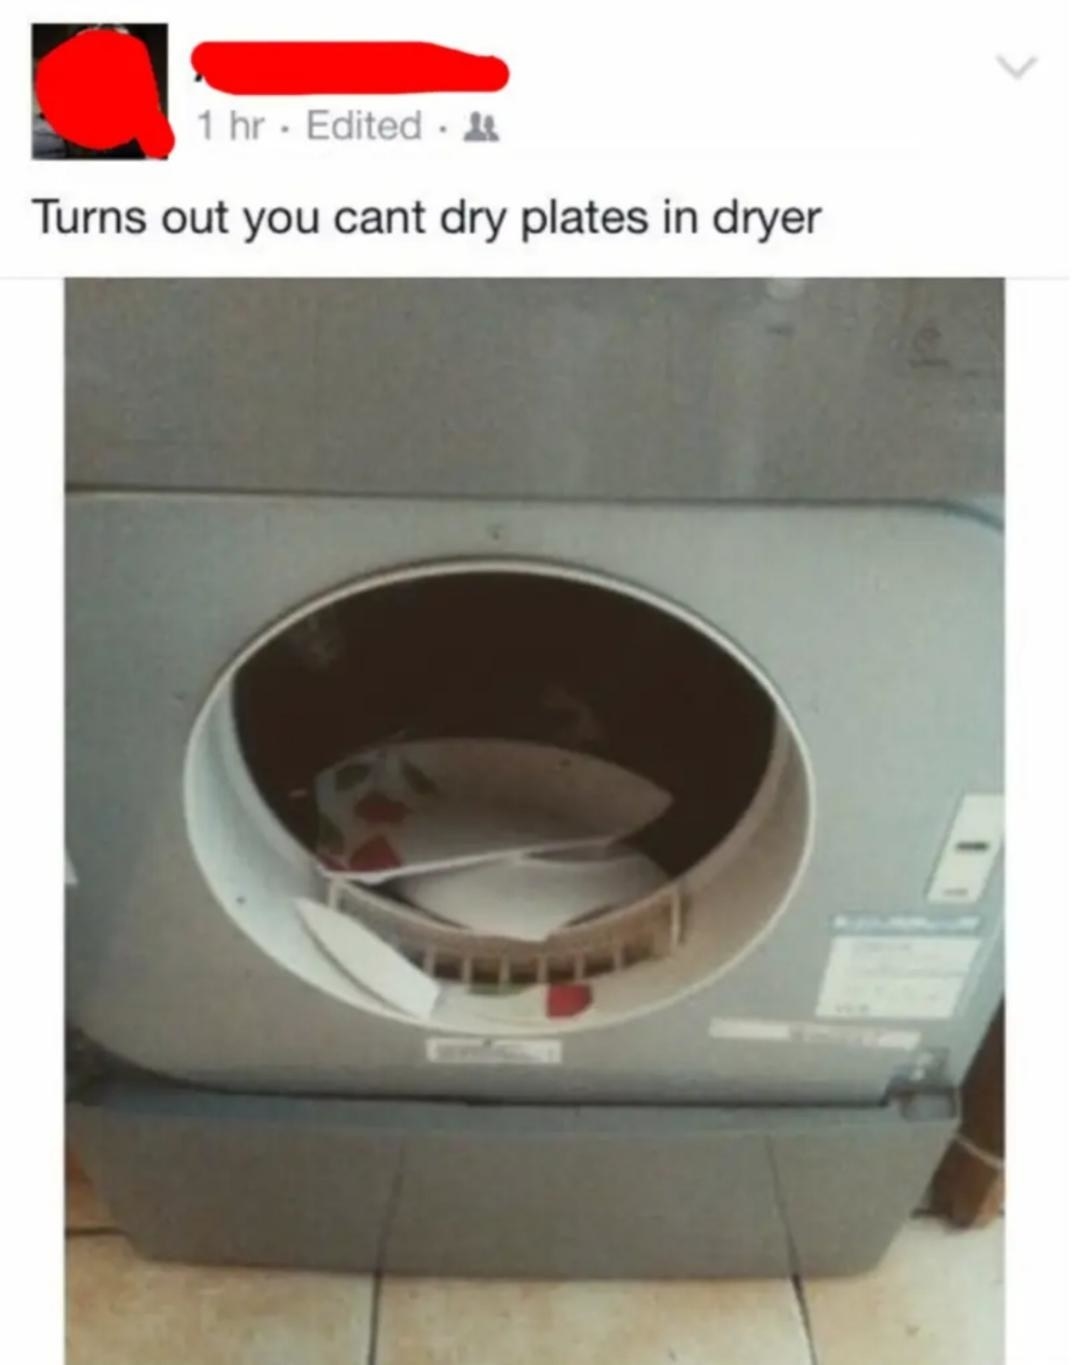 person trying to dry plates in a clothes dryerr